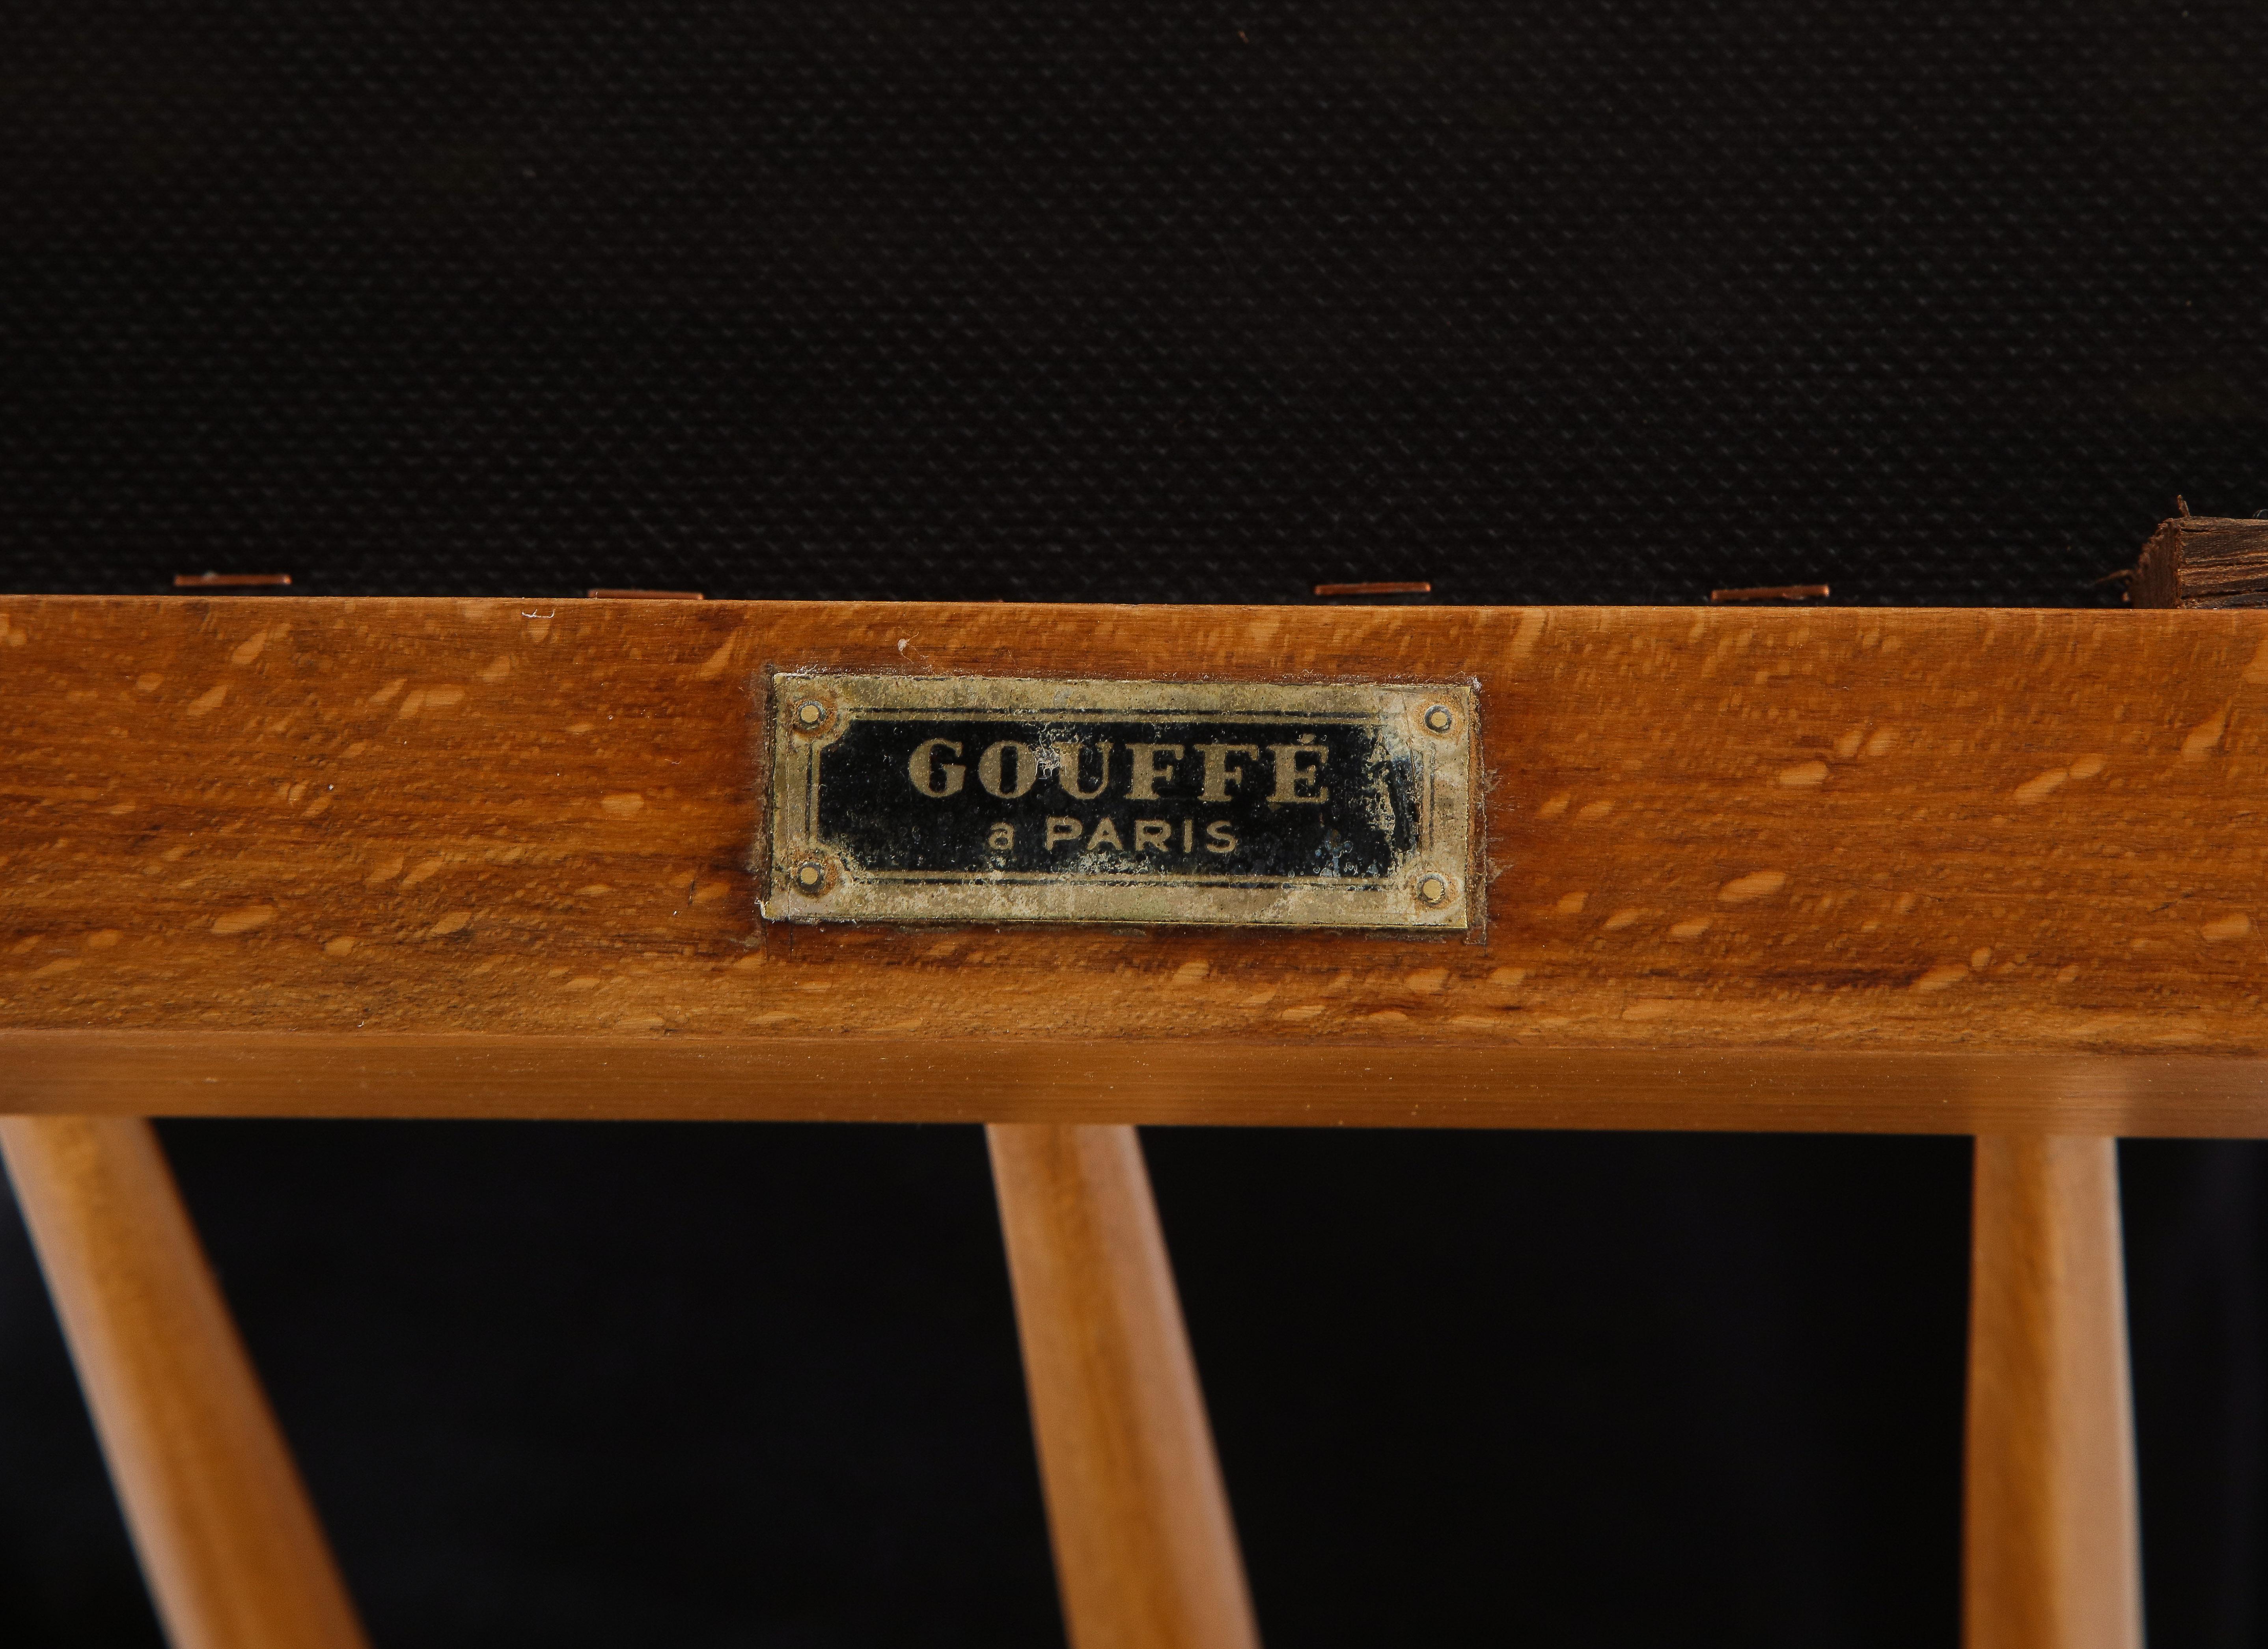 Pair of Maison Gouffé Armchairs, France, circa 1940, Labeled, Numbered 6